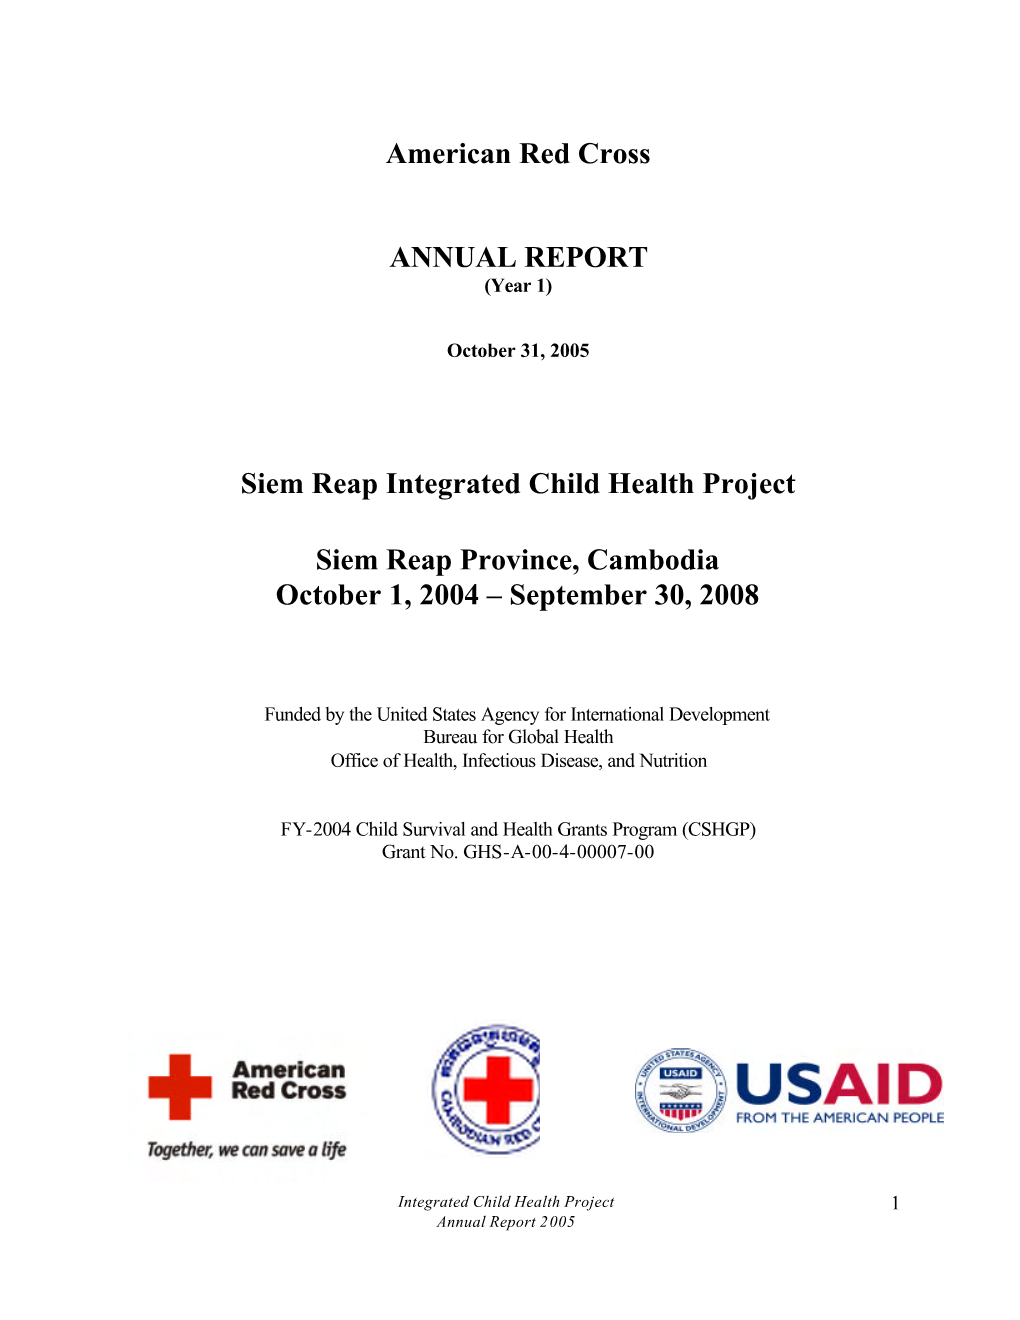 American Red Cross ANNUAL REPORT Siem Reap Integrated Child Health Project Siem Reap Province, Cambodia October 1, 2004